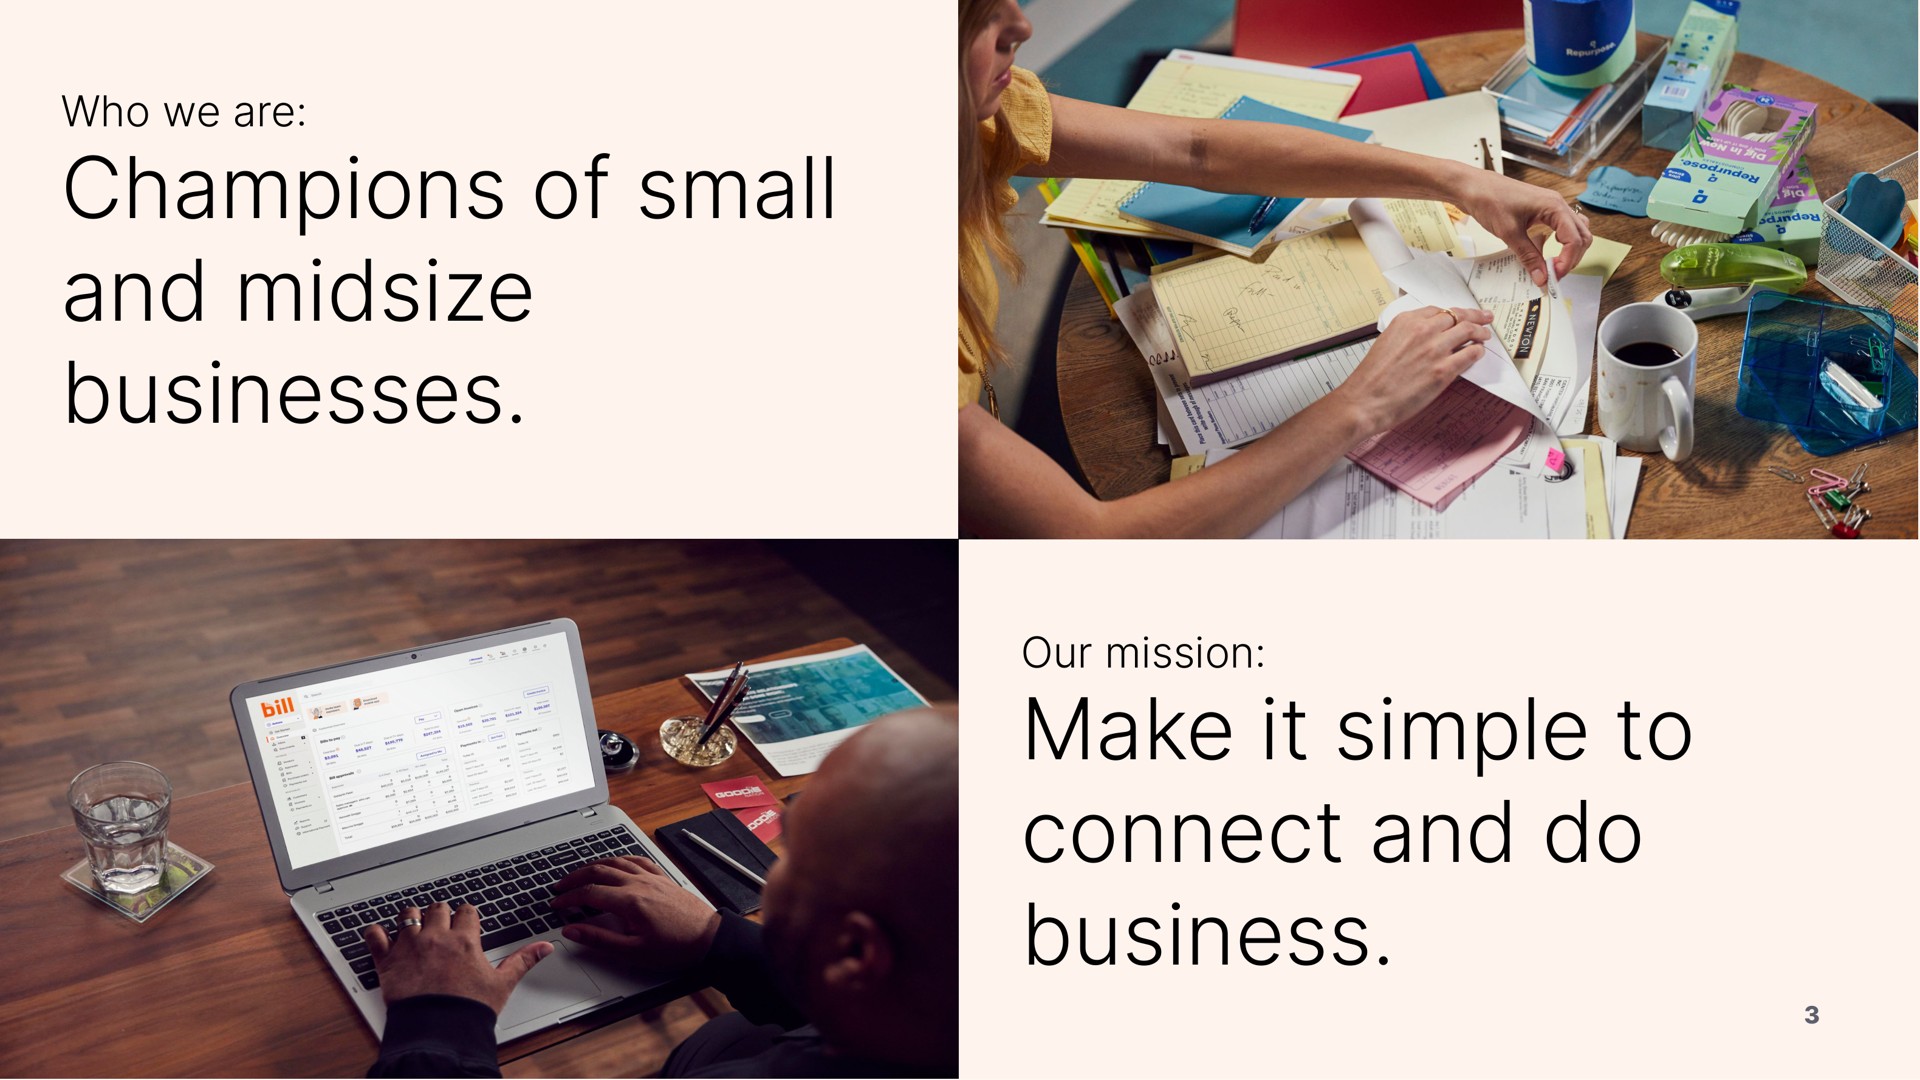 champions of small and businesses make it simple to connect and do business so | Bill.com